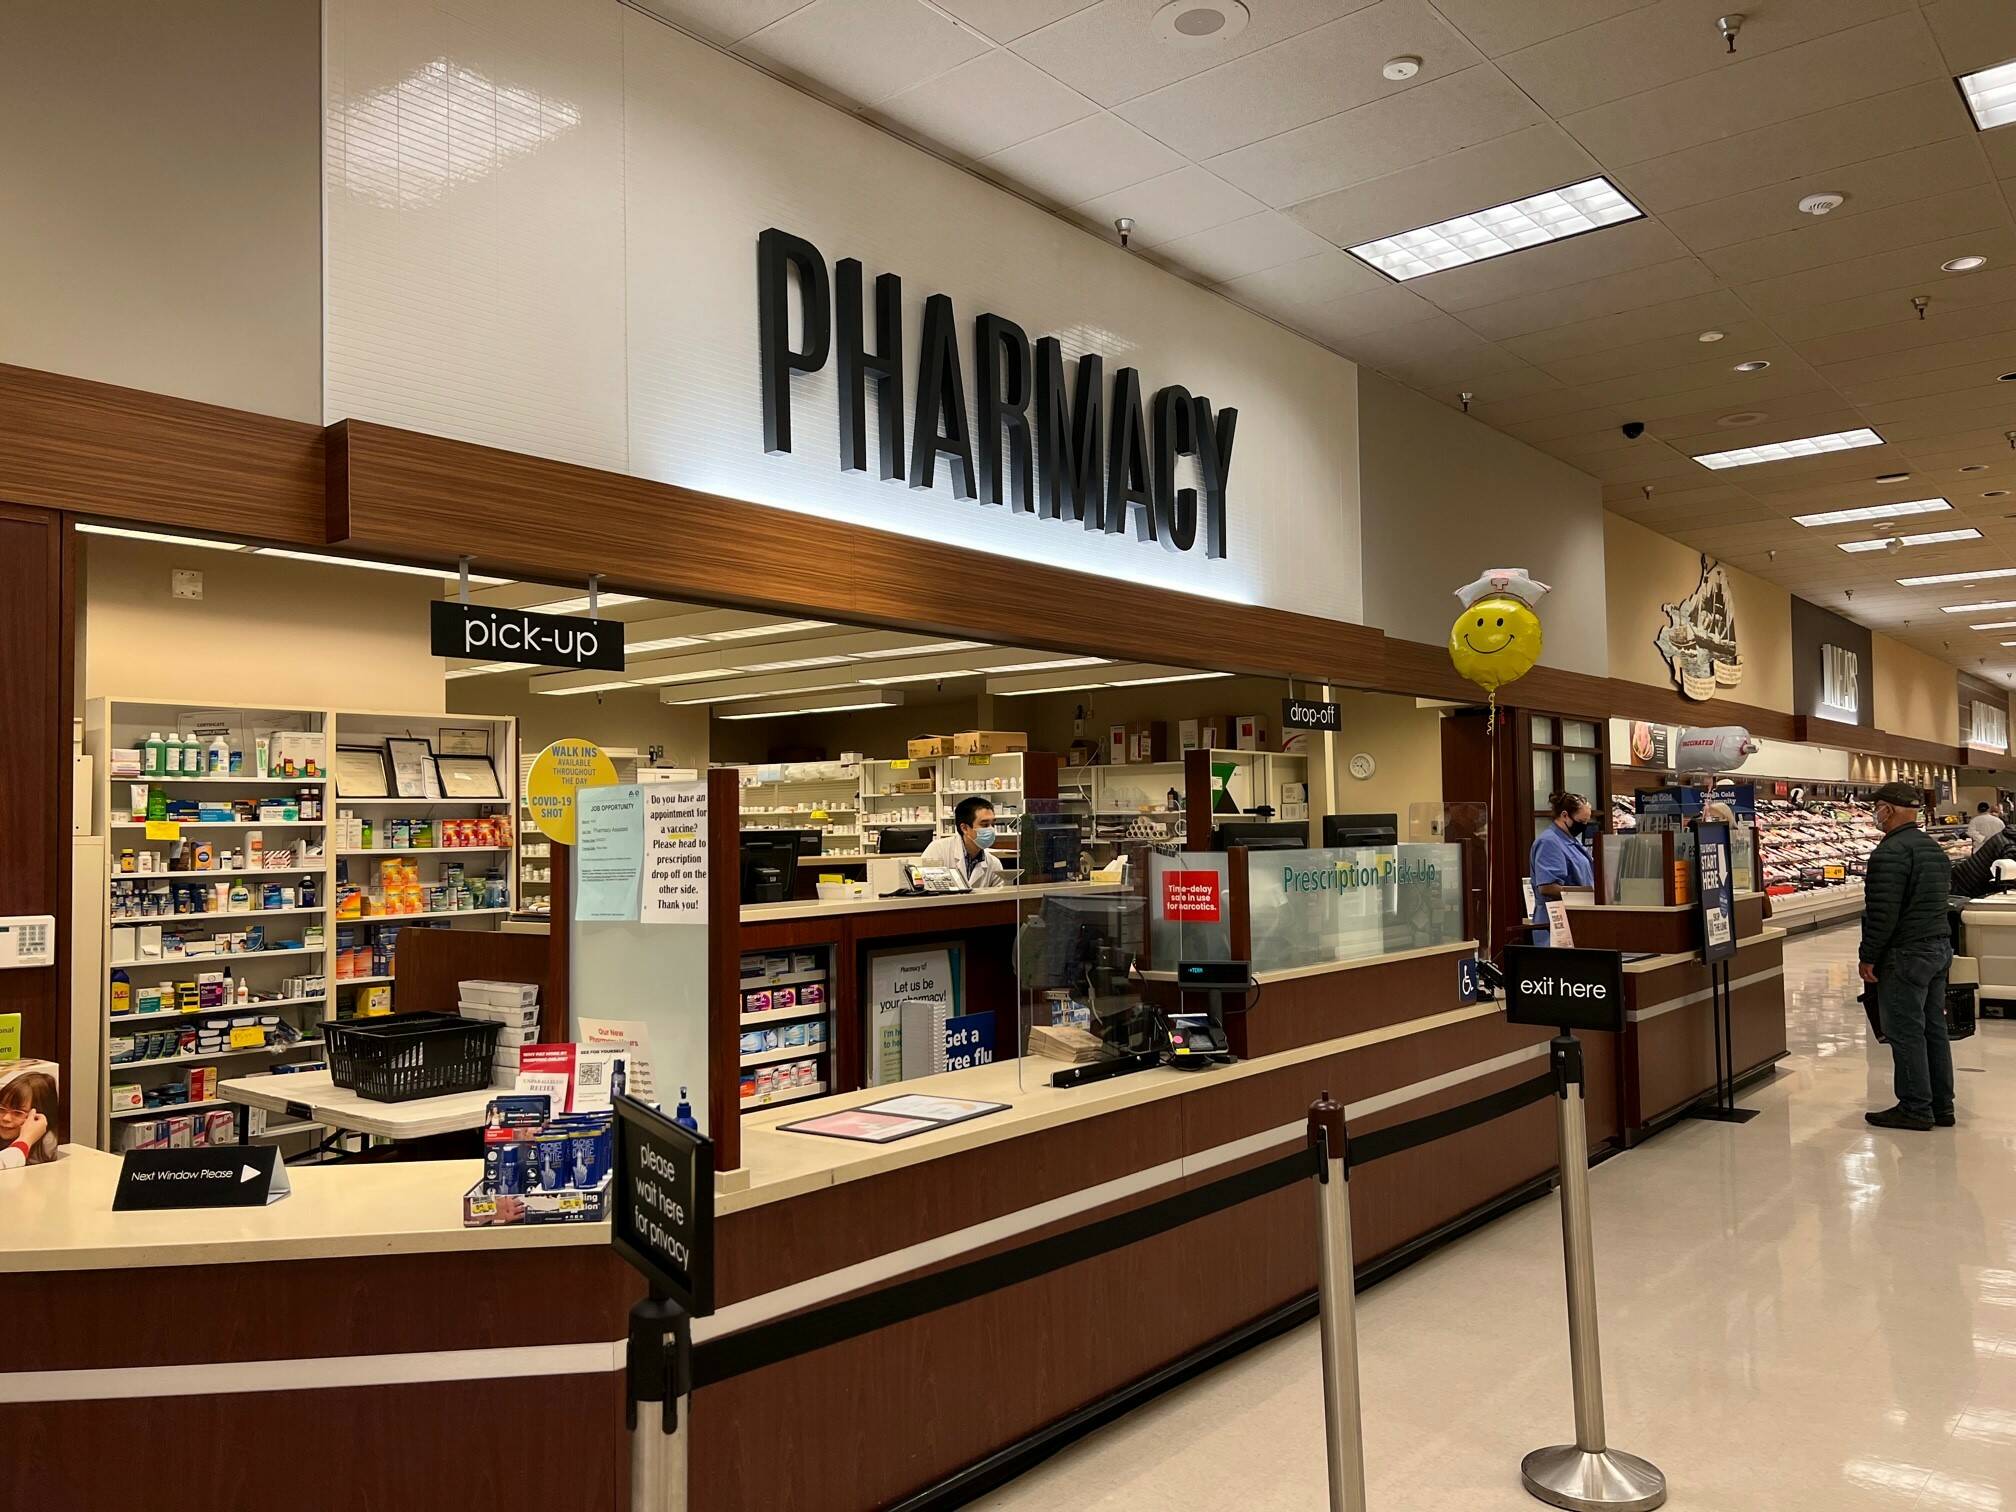 Safeway Pharmacy at 1207 S. 320th Street, Federal Way, offers an HIV prevention drug with no appointment. Courtesy photo